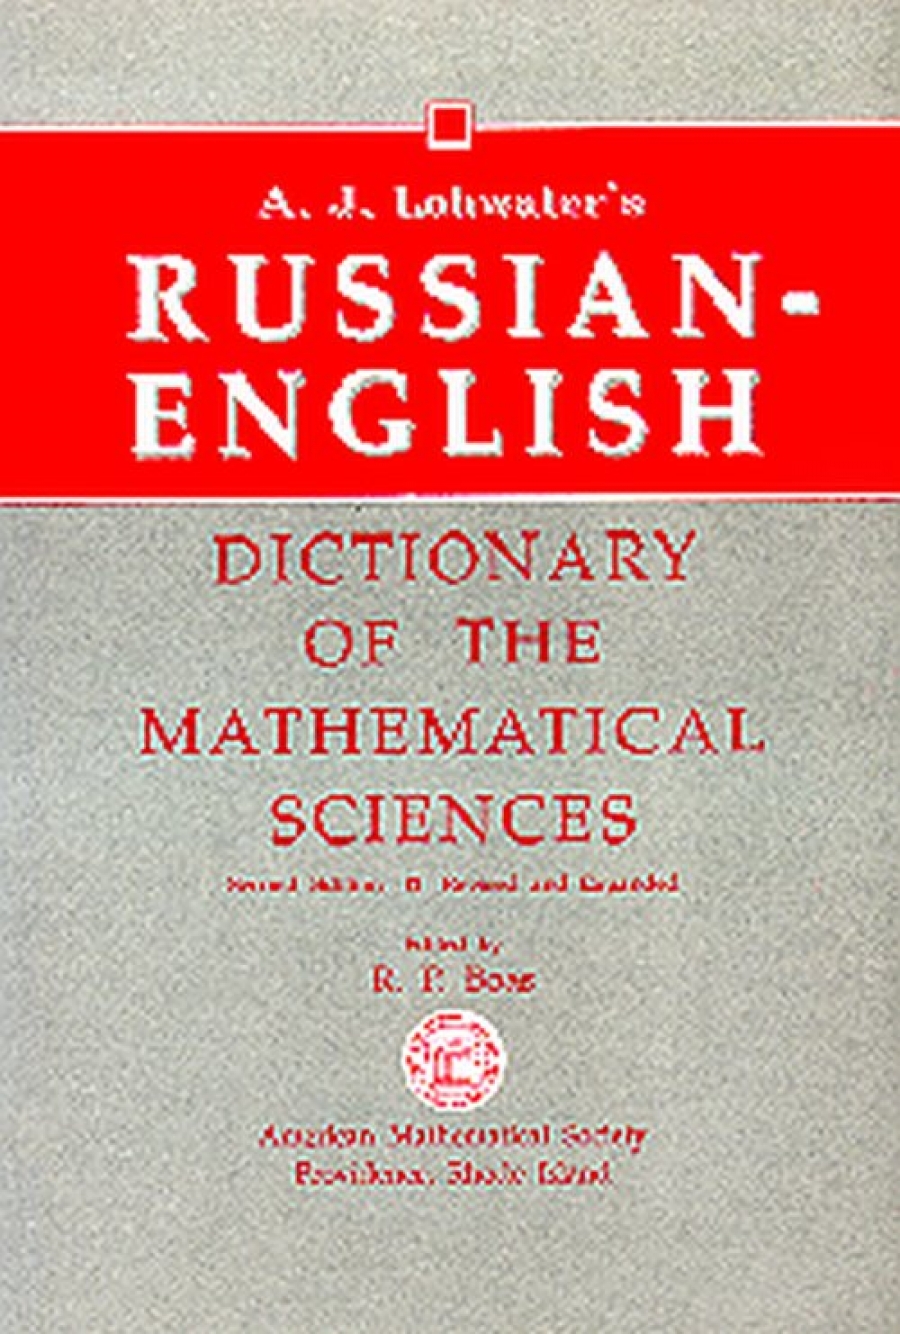 A. J. Lohwater / Lohwaters Russian-English Dictionary of the Mathematical Sciences / Lohwater A.J. 